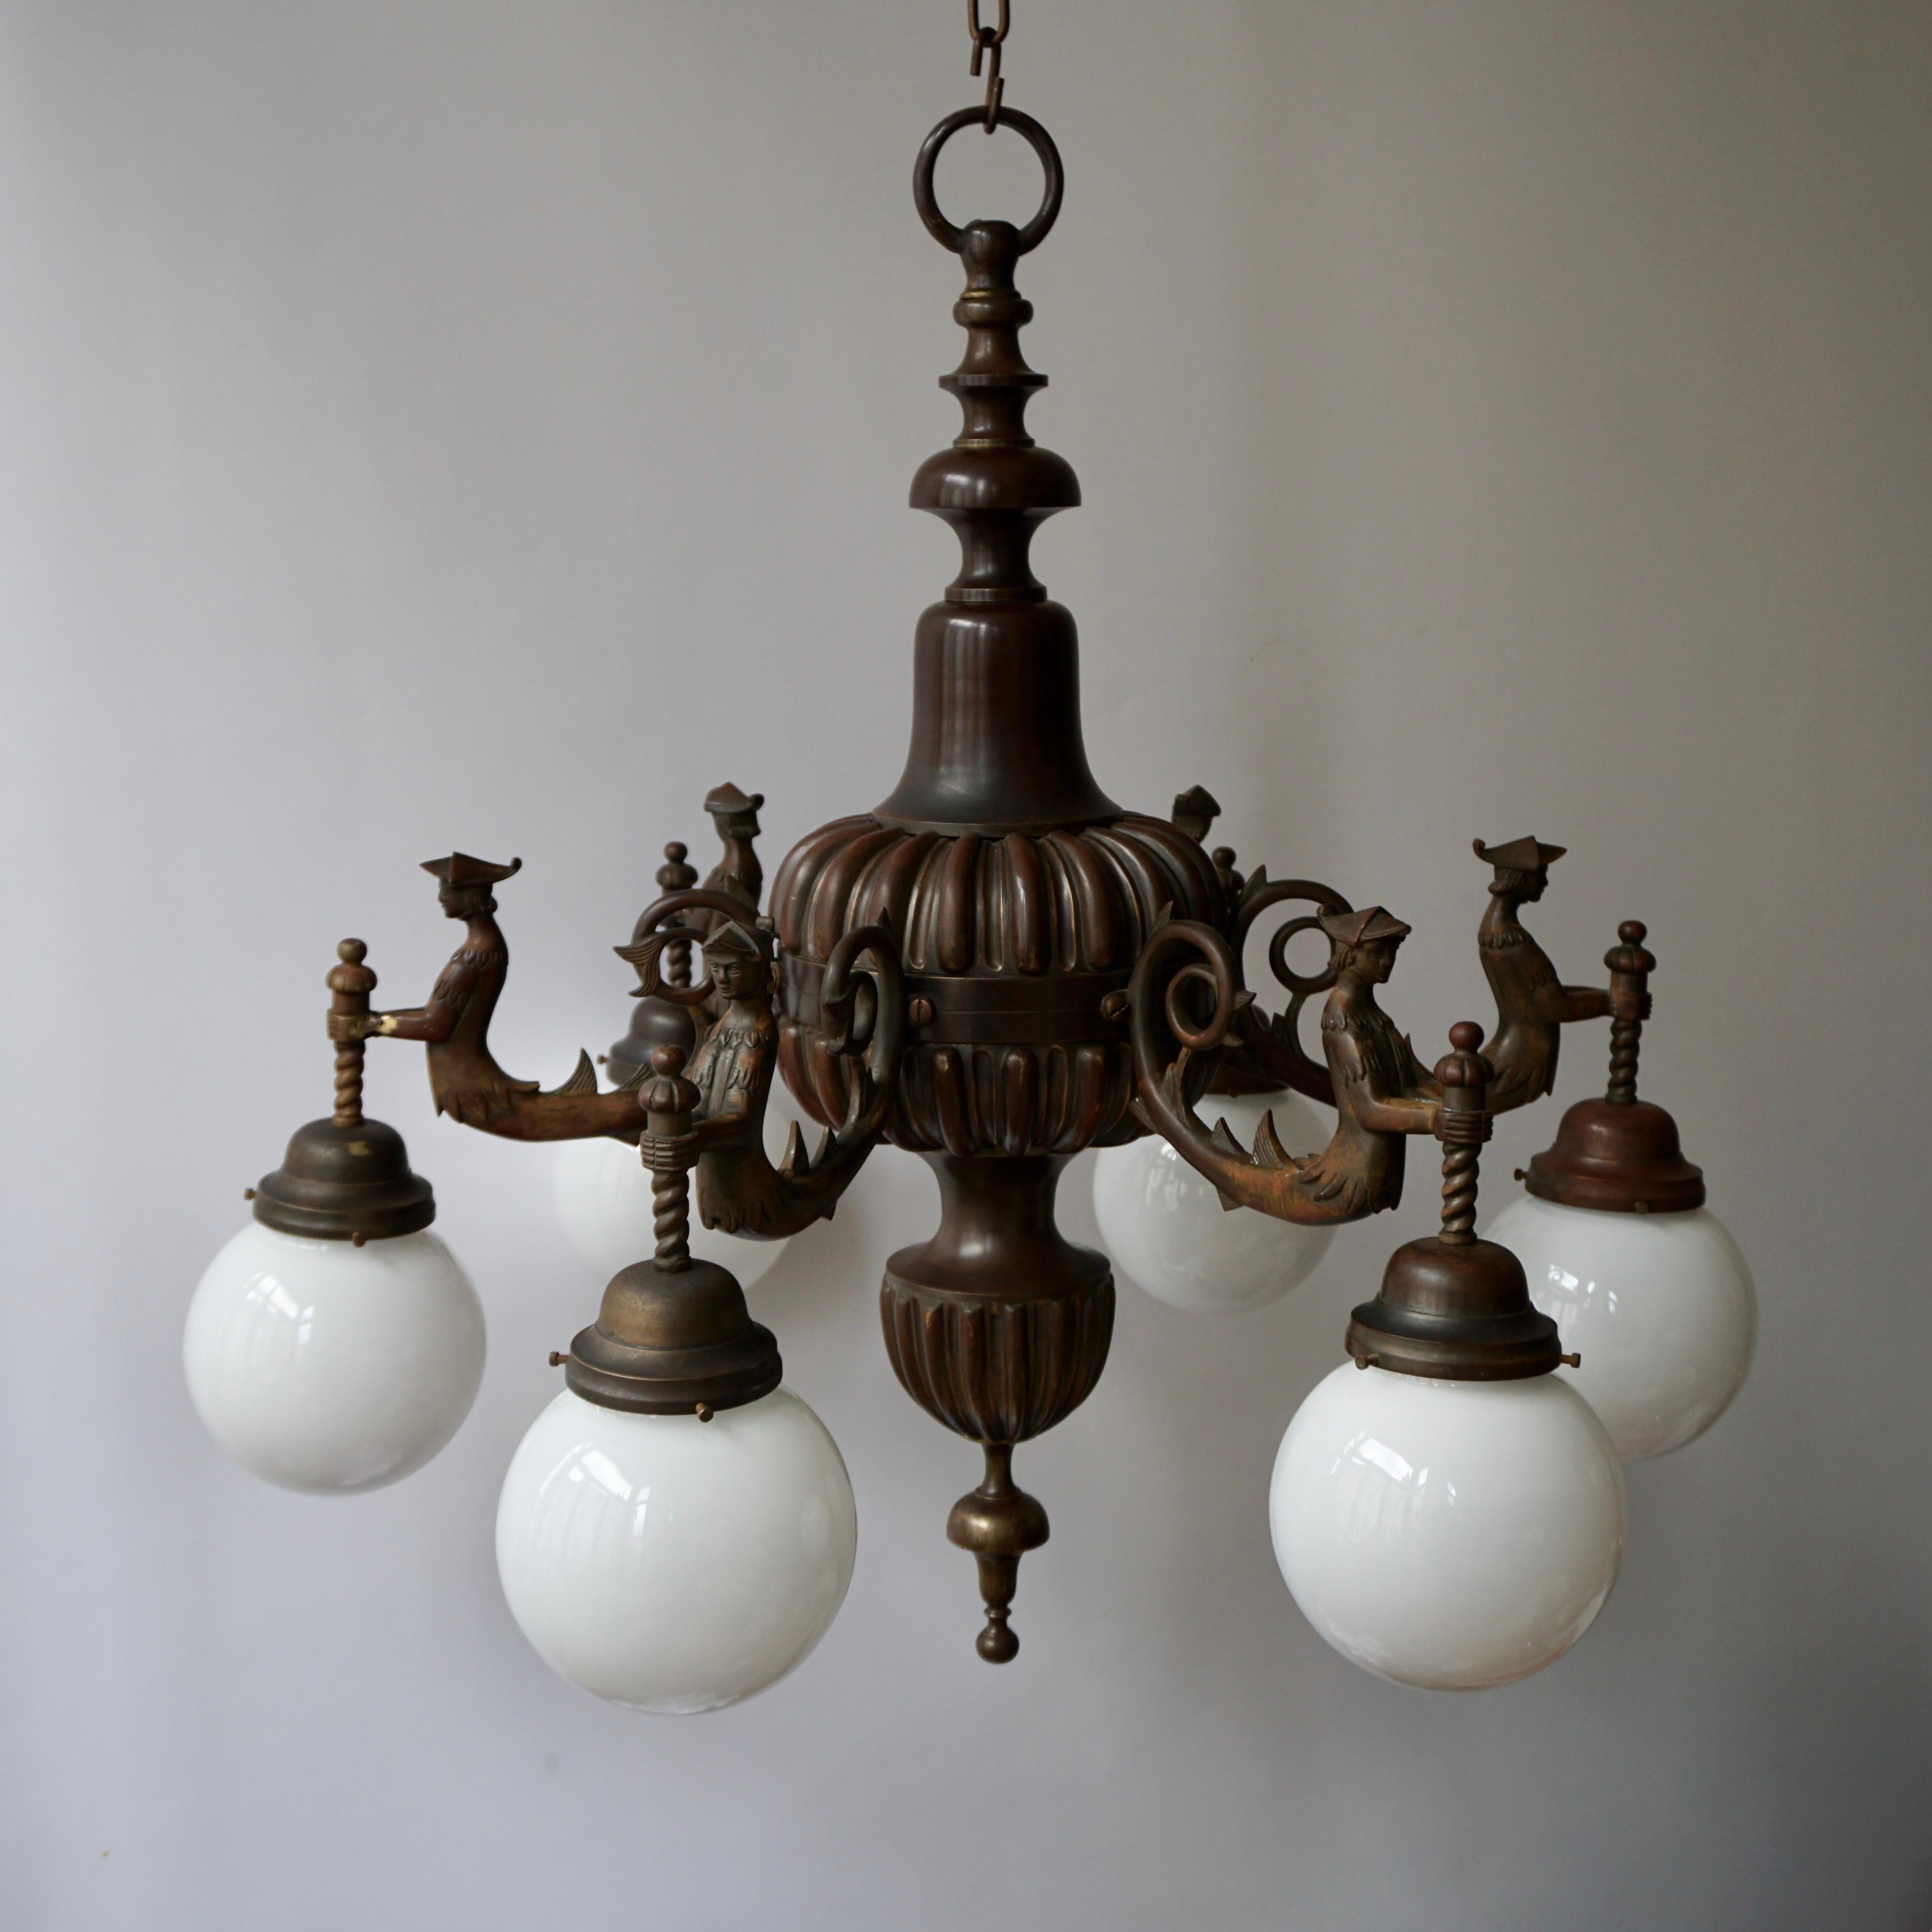 A spectacular and large Italian patinated bronze multi light figural chandelier.
Measures: Diameter 78 cm.
Height fixture 80 cm.
Total height including the chain and canopy 150 cm.
Weight 20 kg.

Not wired for US standard.